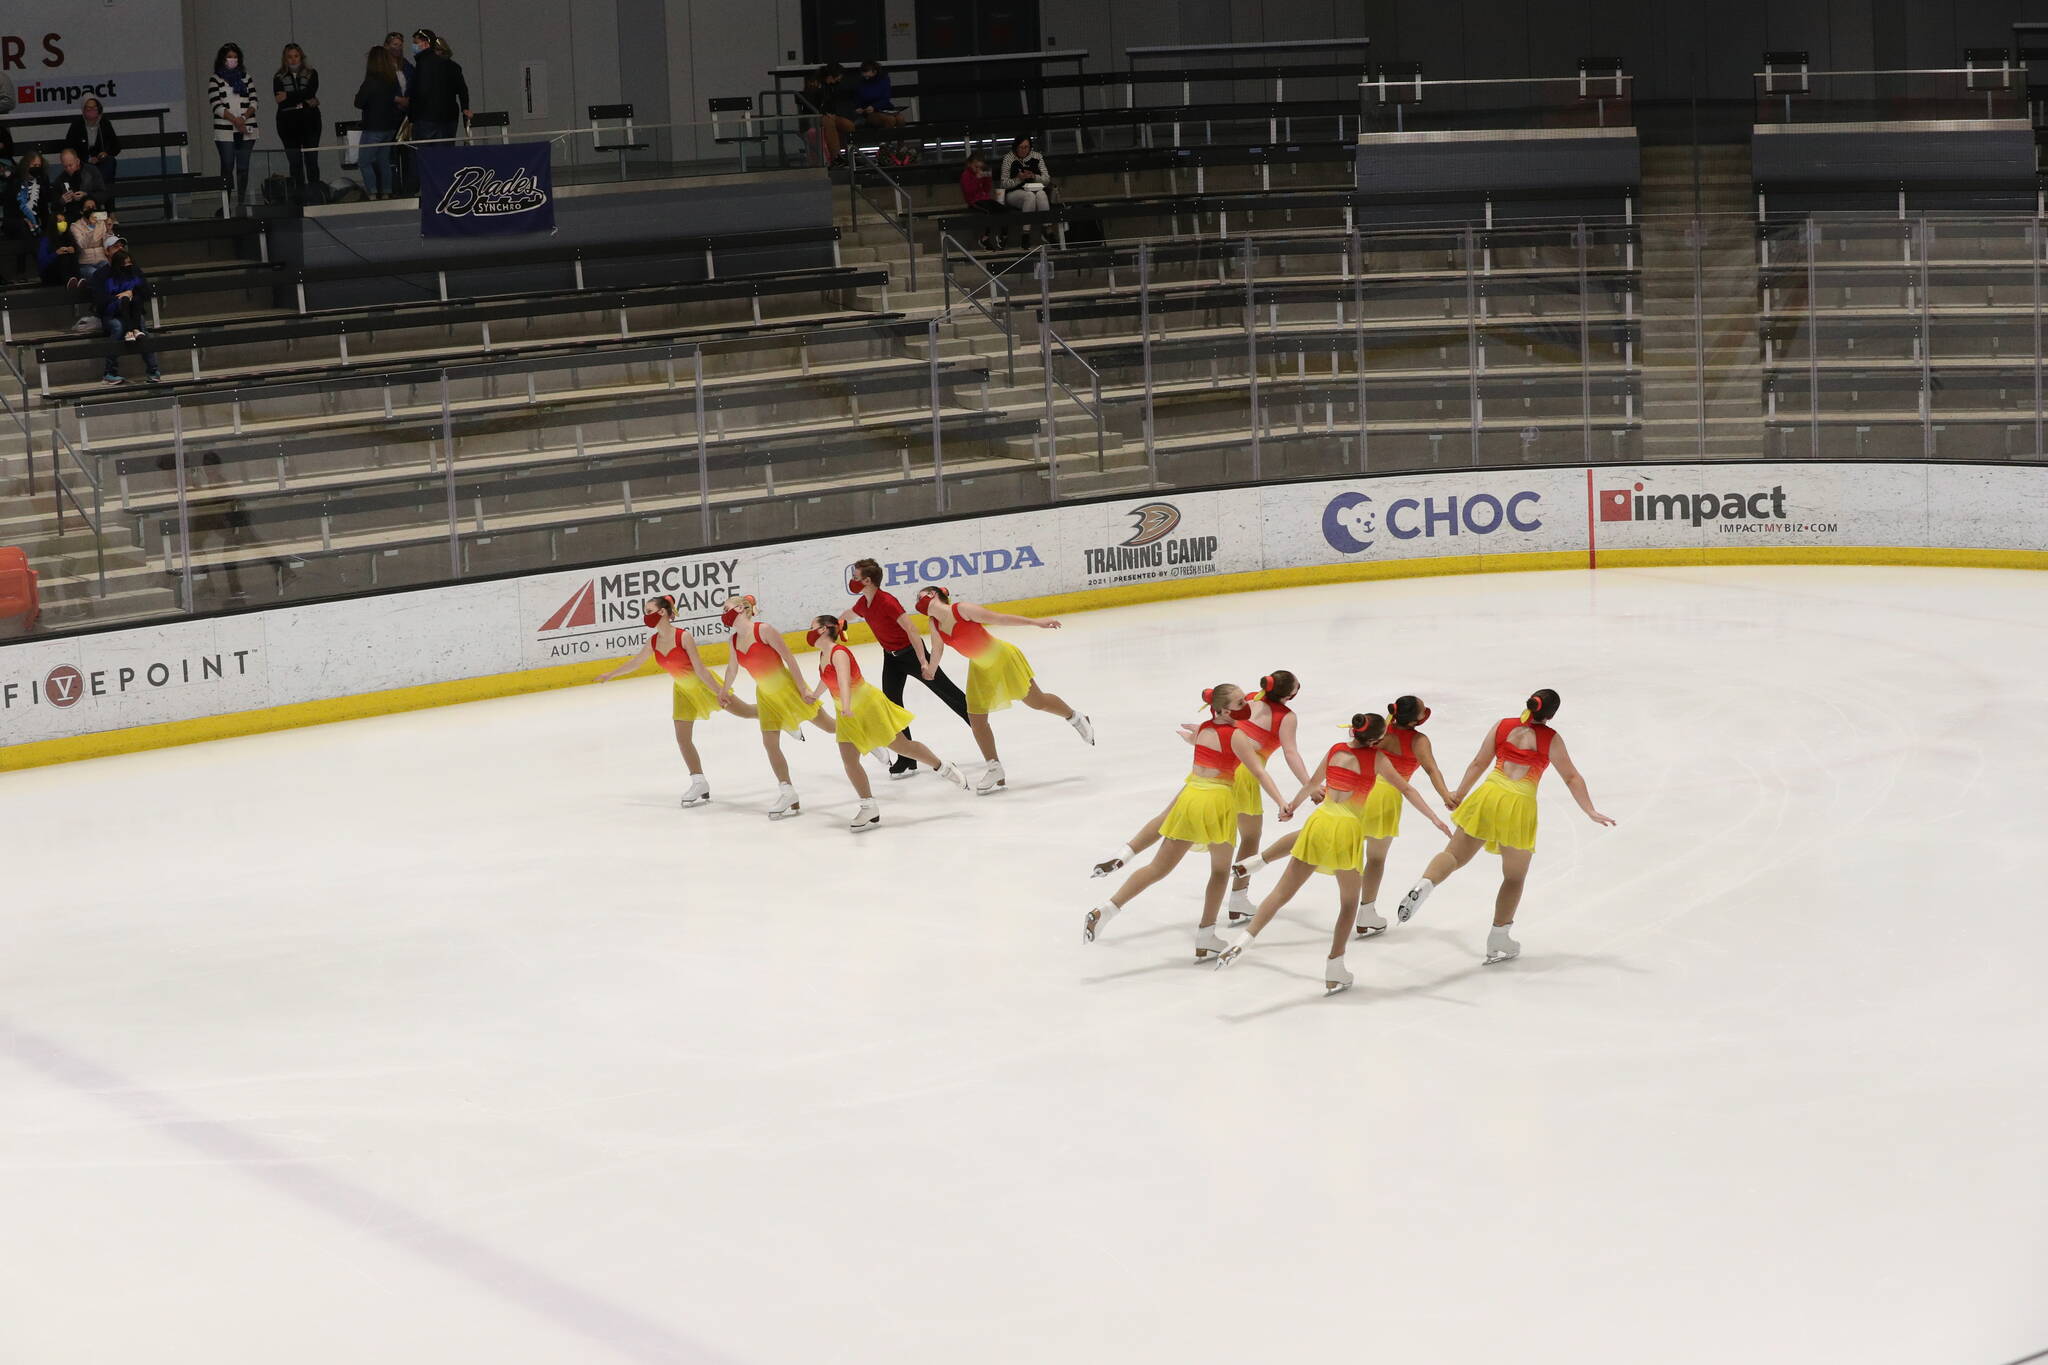 Juneau’s Team Forget-Me-Not competes in the Synchro Fall Classic in California in November as they return to competitions after nearly two years without skating against another team. (Courtesy photo / Cynthia Slawter Photography)